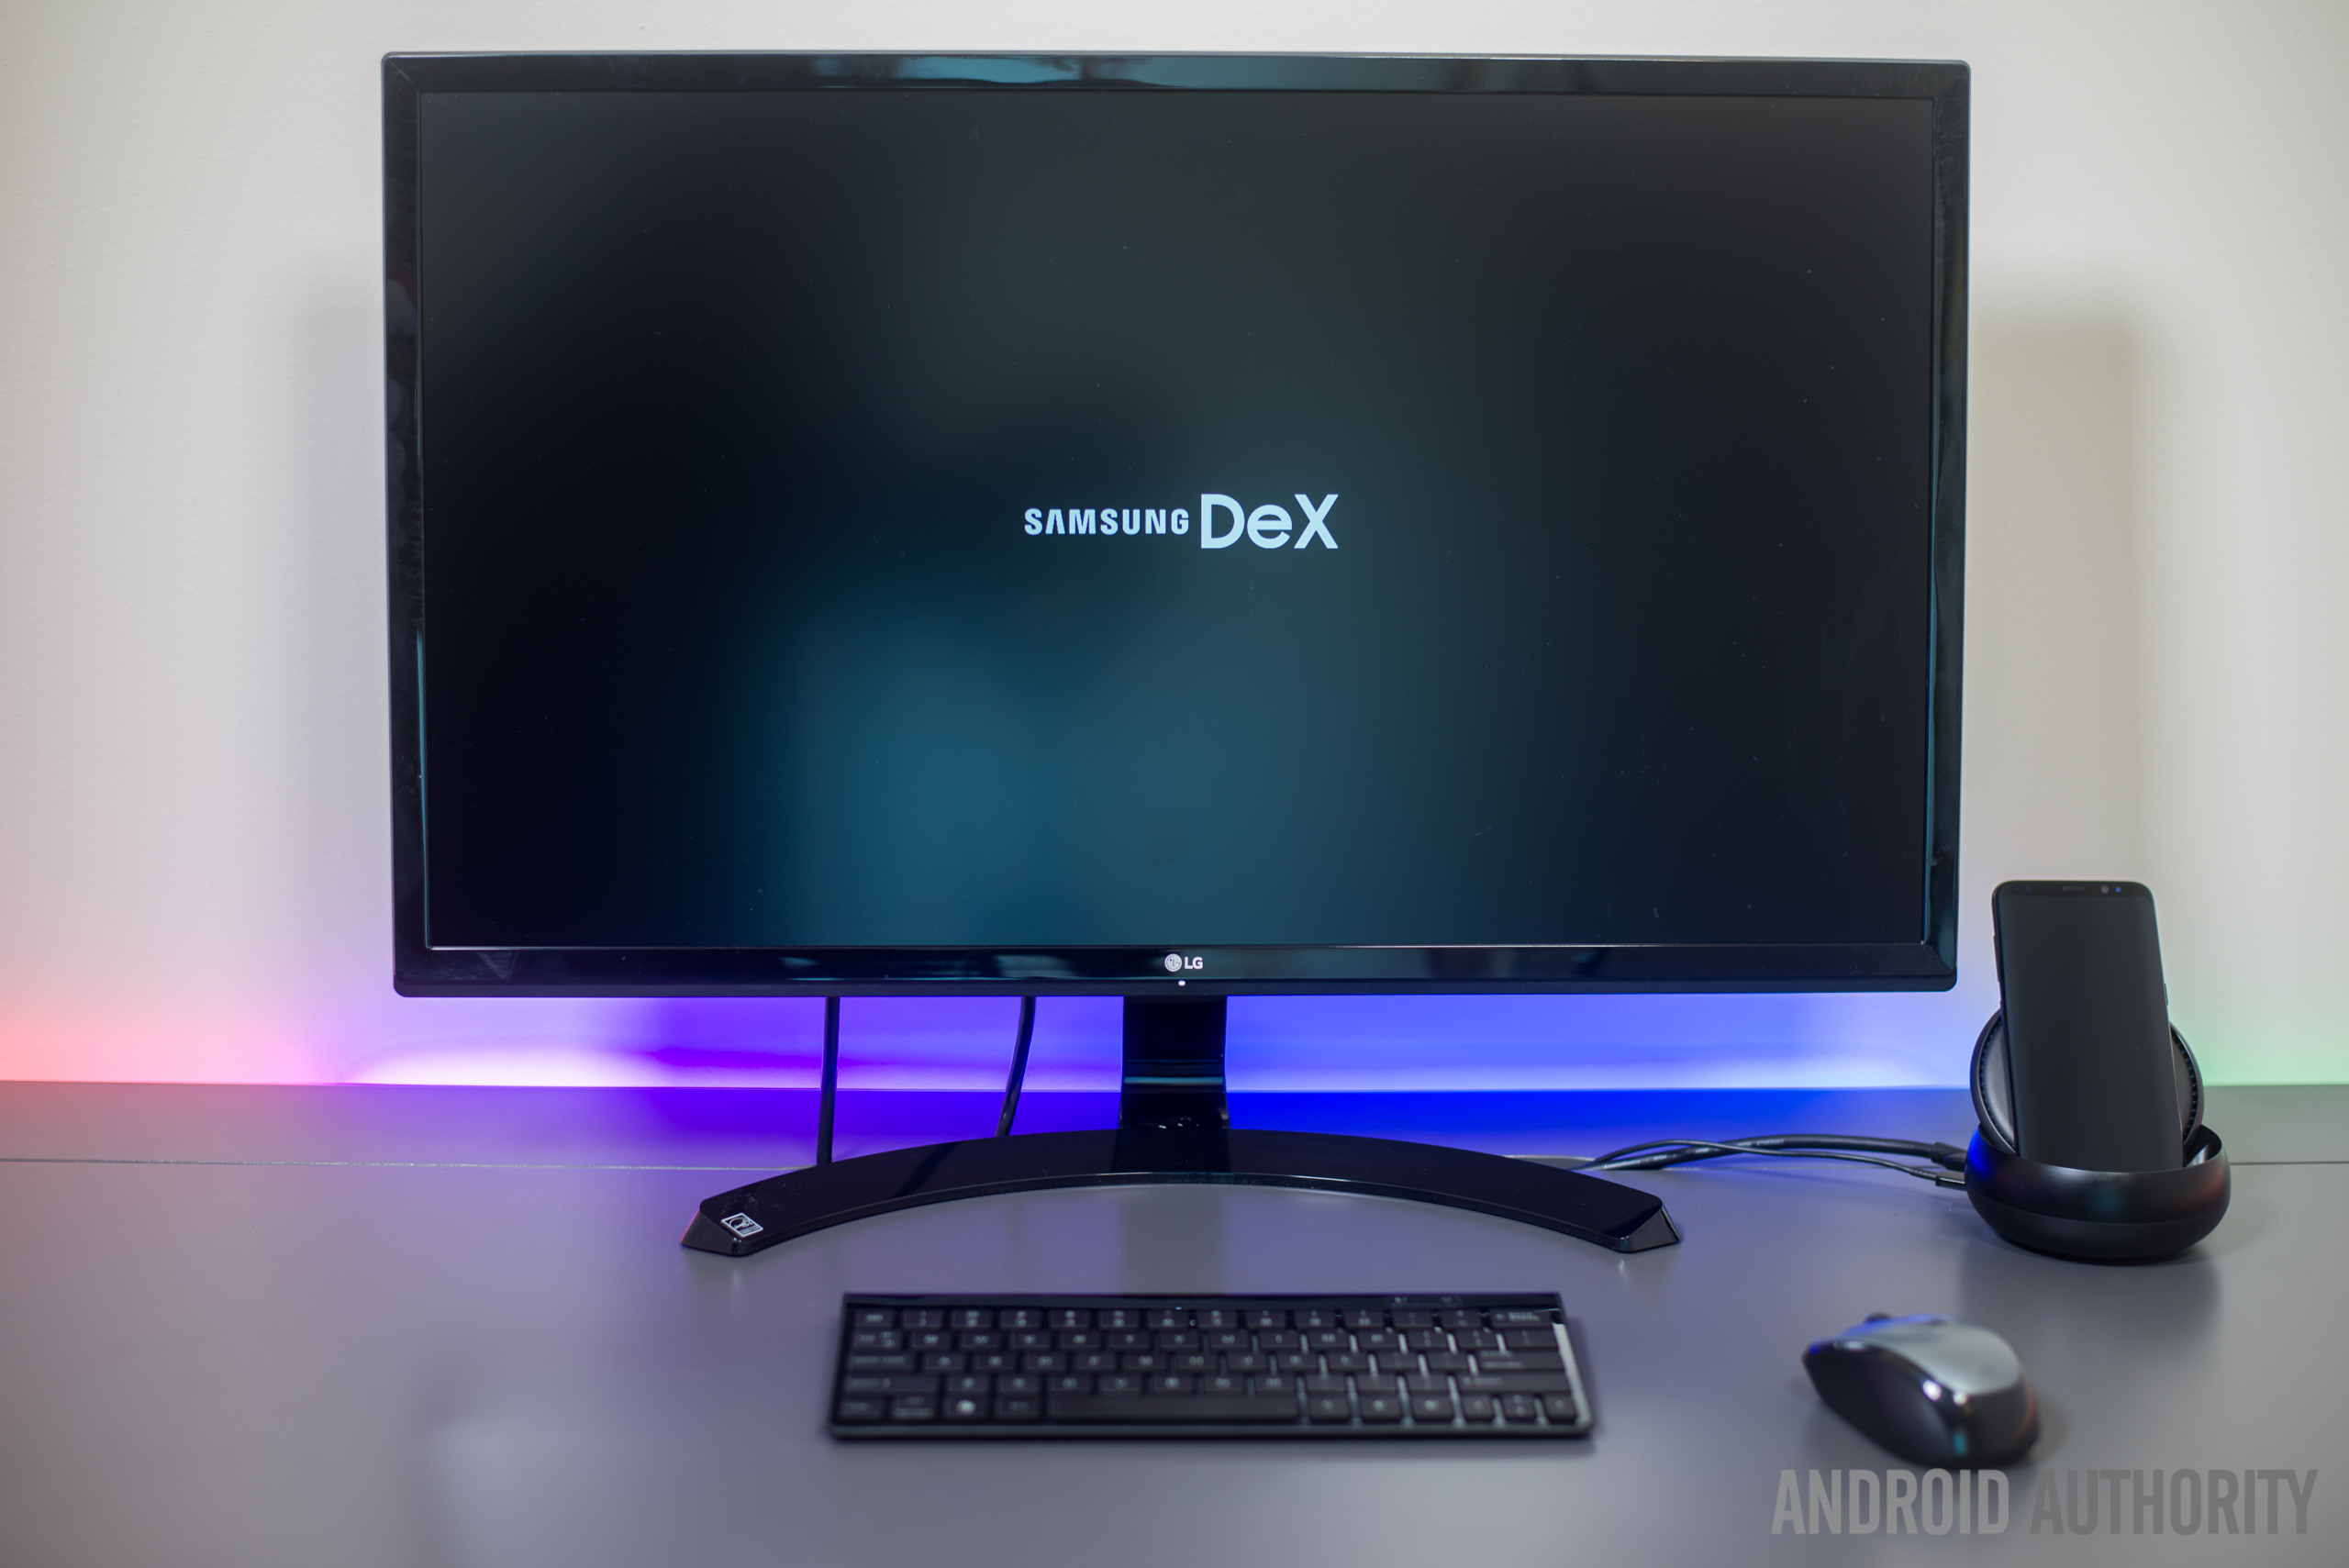 How to get started with Samsung DeX and the Galaxy S8 - Android Authority